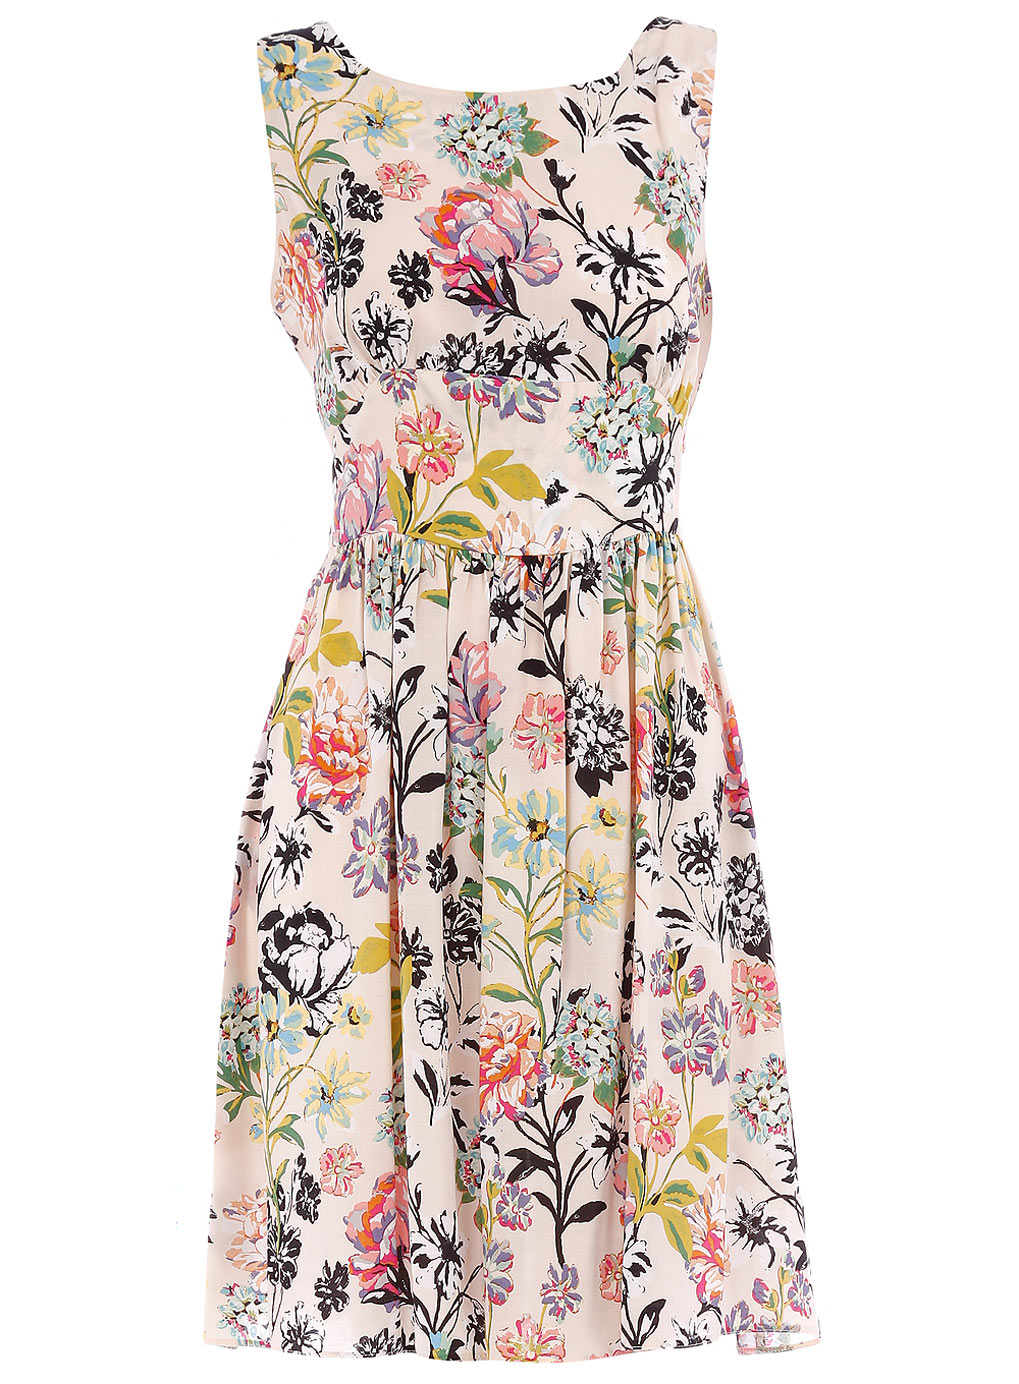 Dorothy Perkins' Floral Dresses. - Nerd About Town